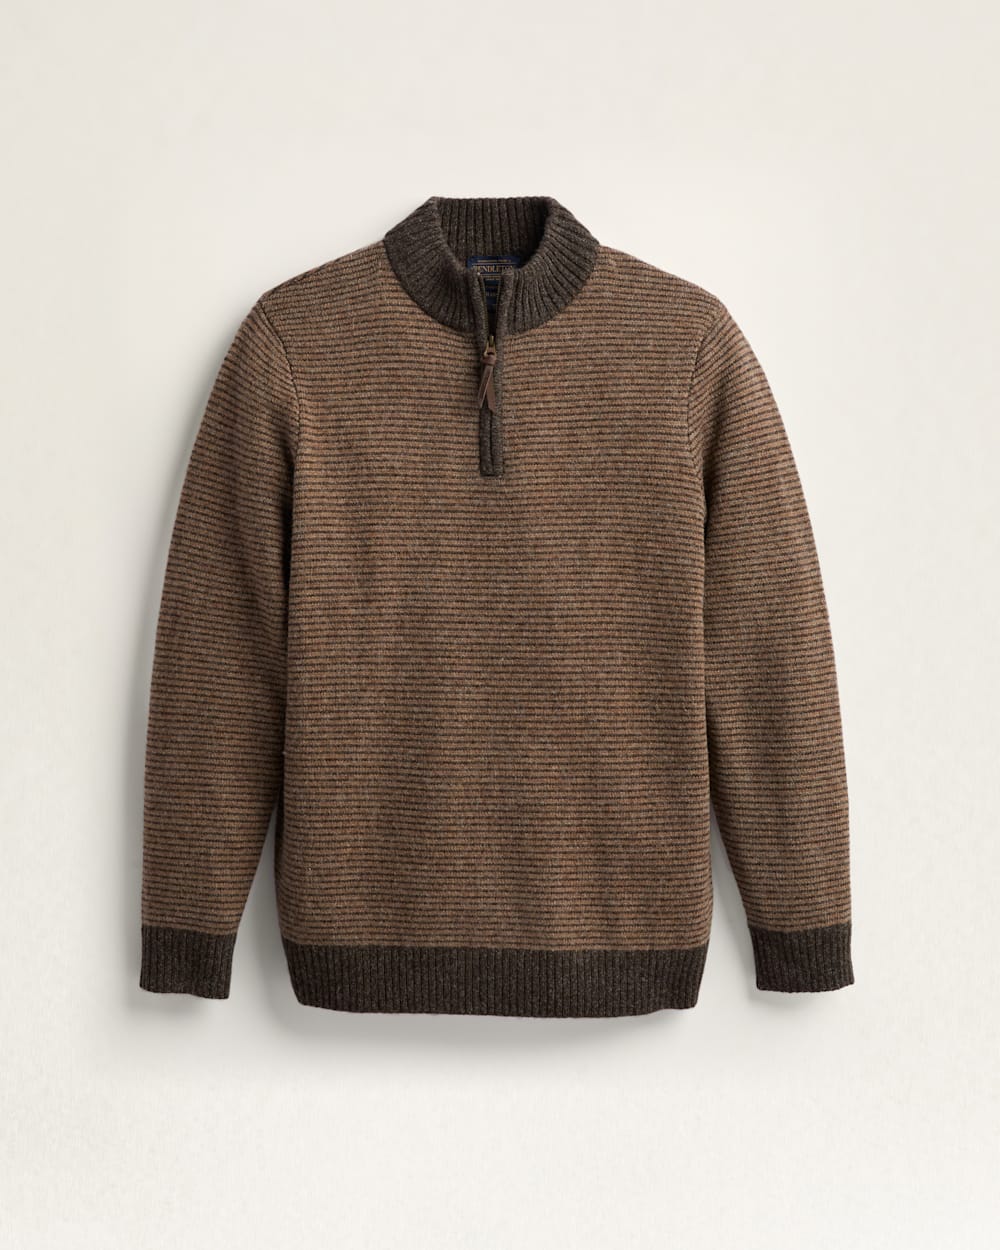 MEN'S SHETLAND COLLECTION HALF-ZIP SWEATER IN MAHOGANY/TAUPE image number 1